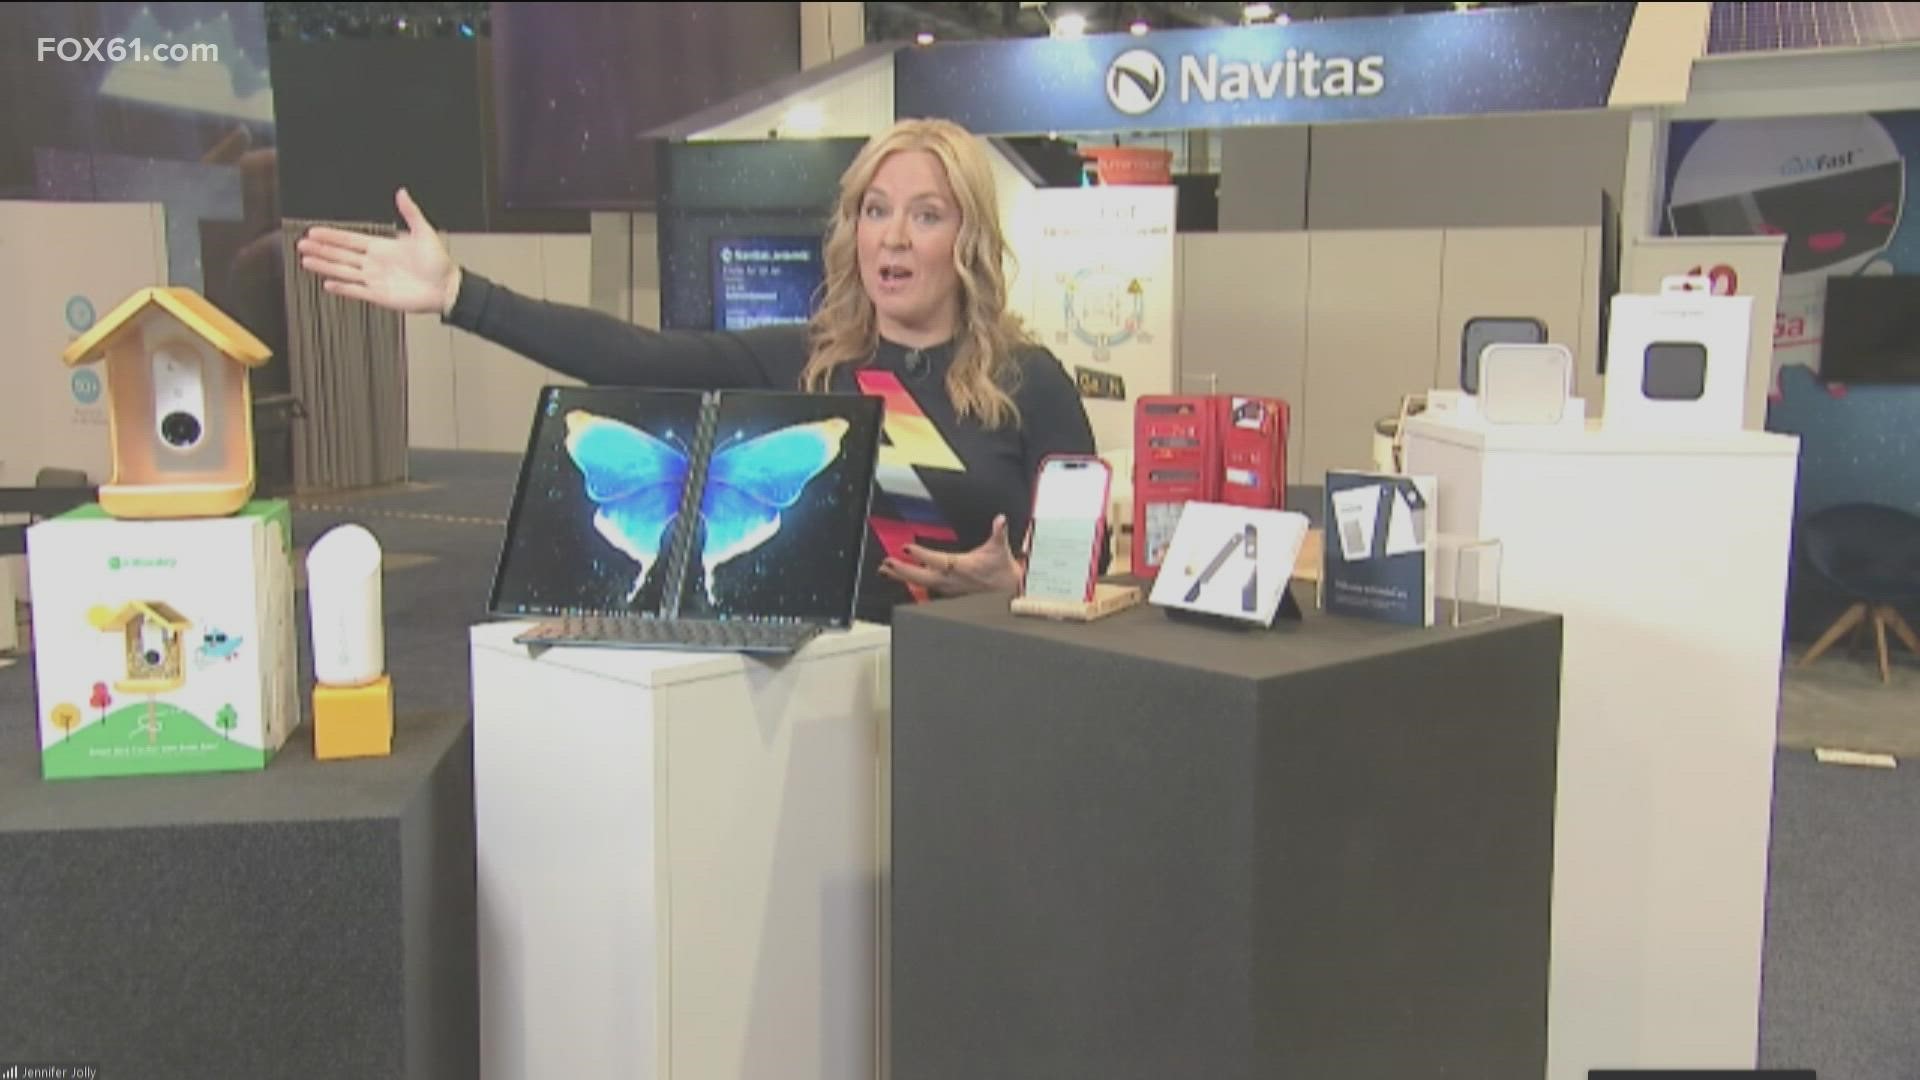 FOX61 speaks to Tech-Life columnist Jennifer Jolly, who shows off more products featured at CES in Las Vegas.